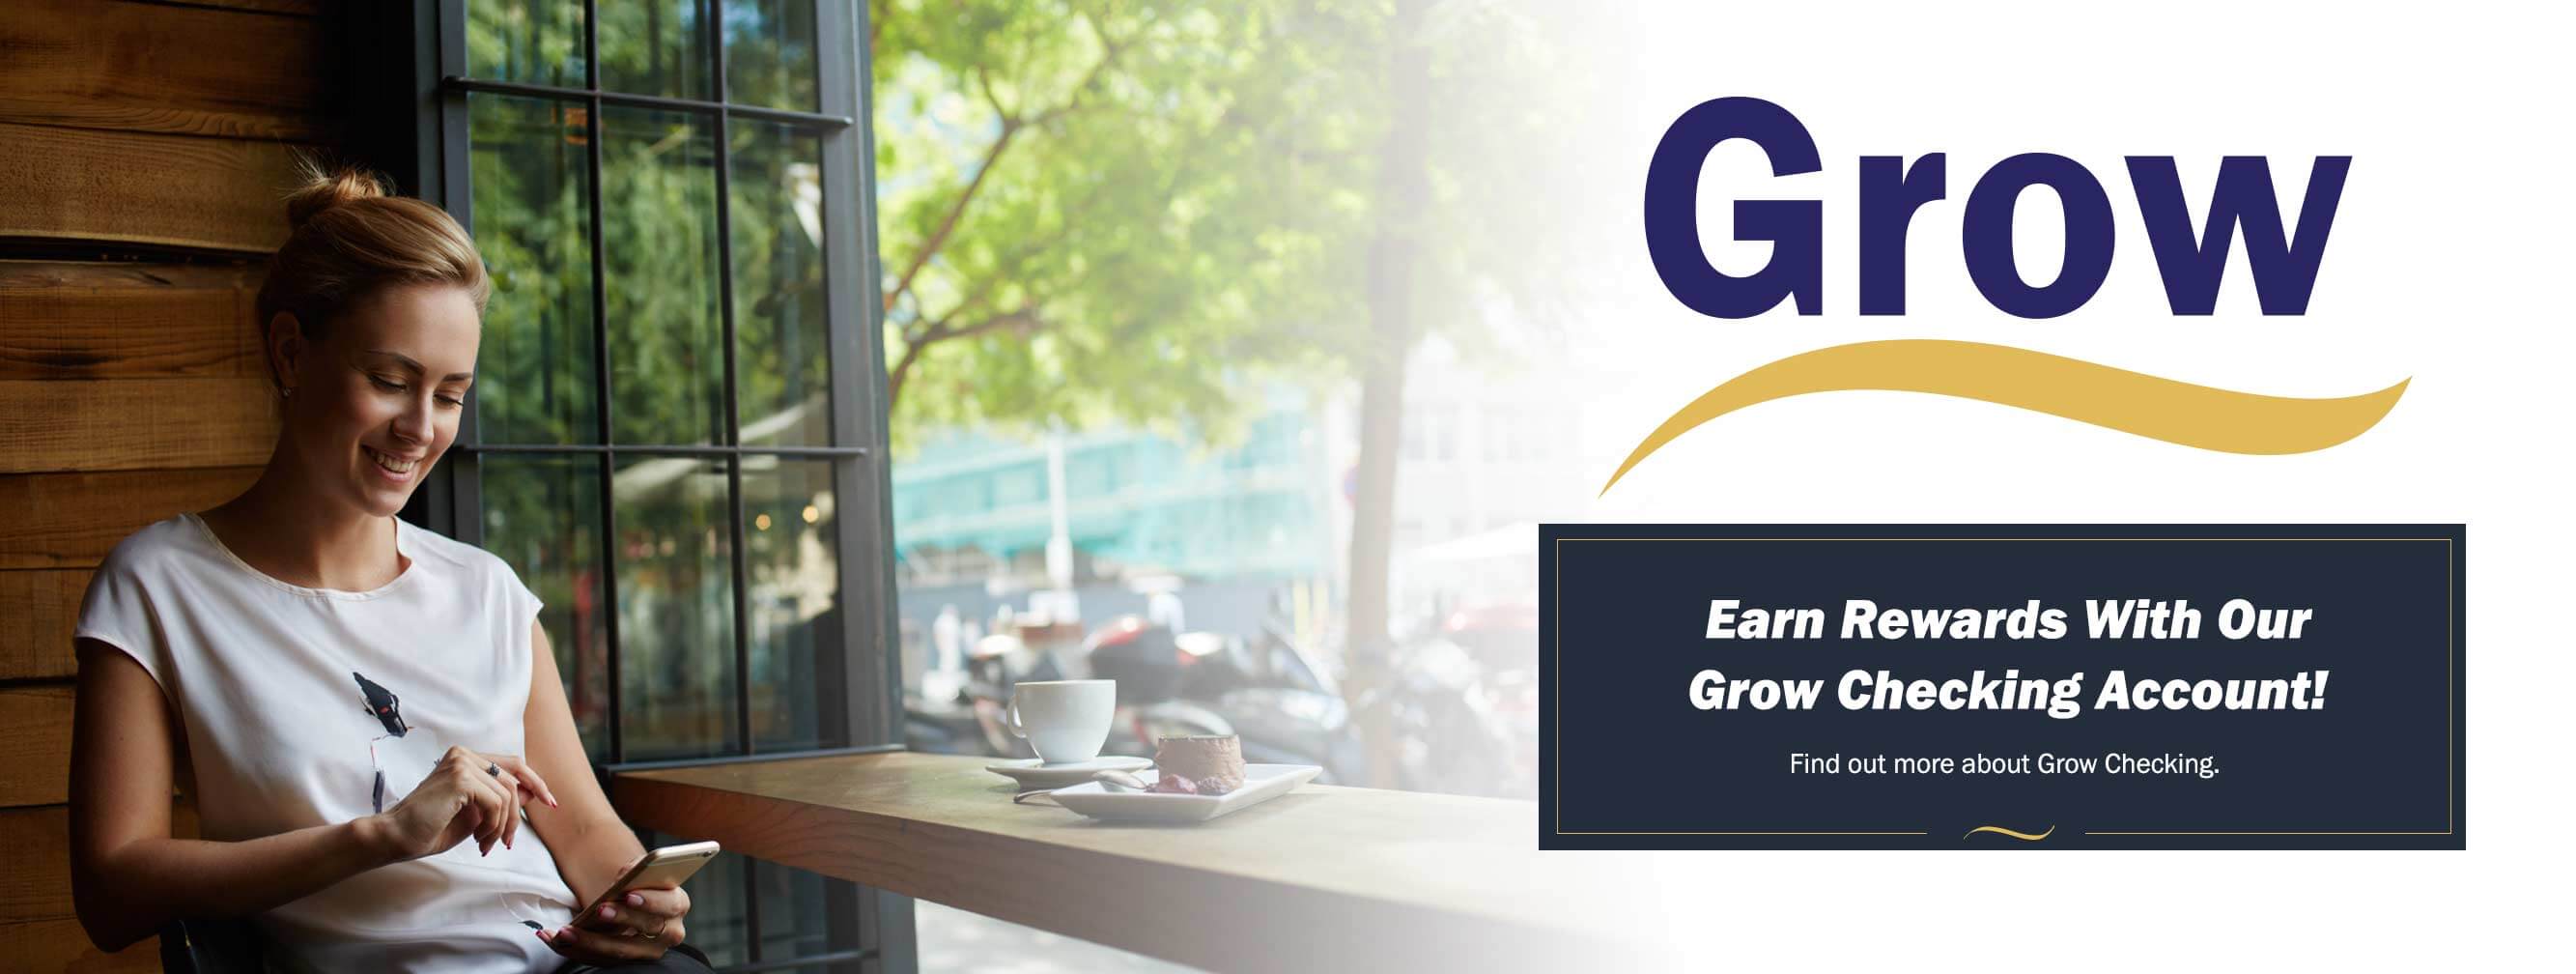 Earn Rewards With Our Grow Checking Account! Find out more about Grow Checking.